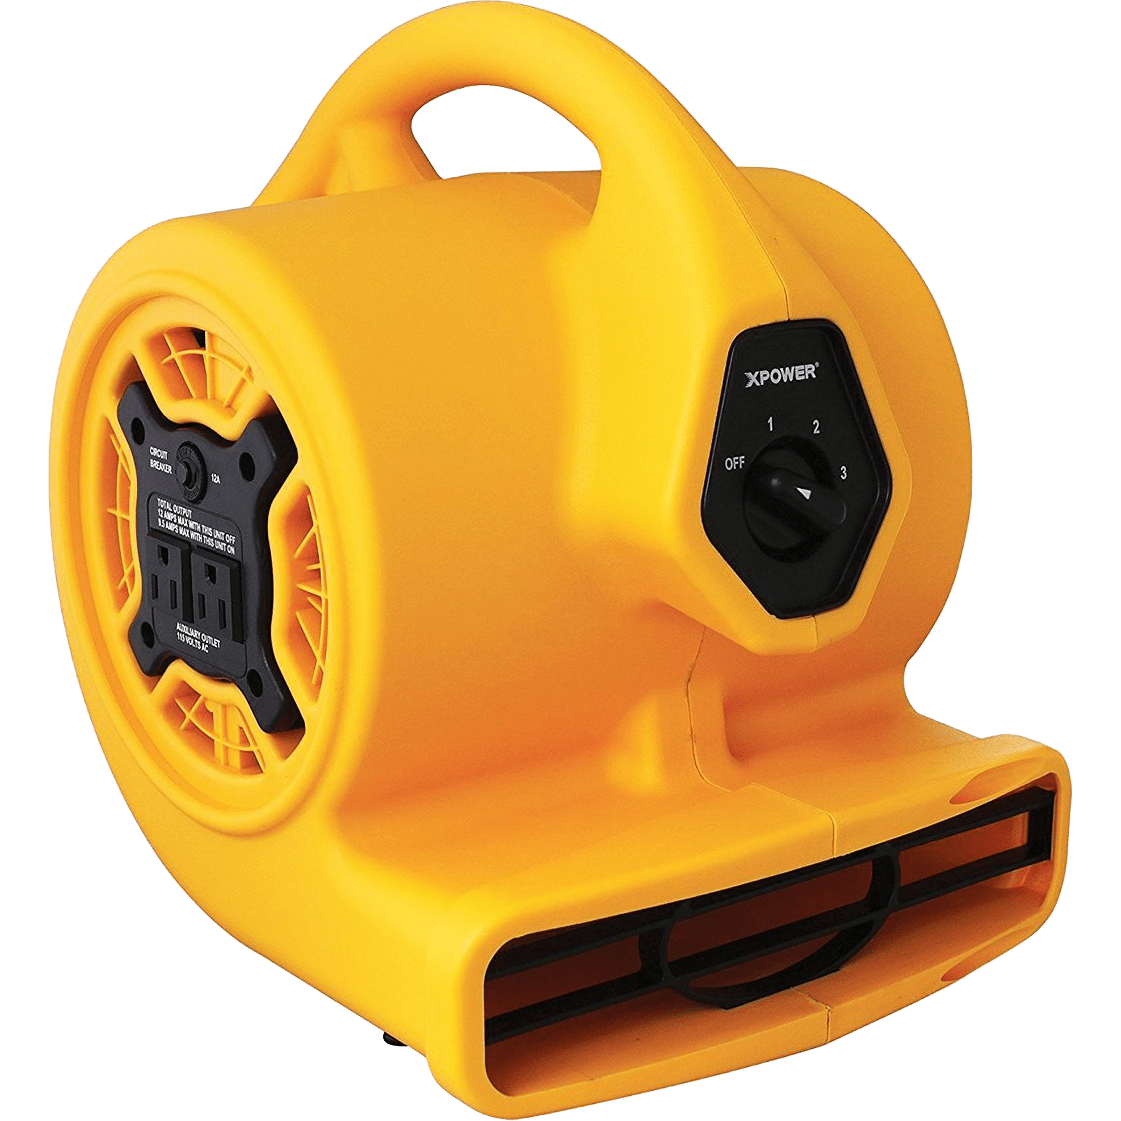 XPOWER 800 CFM Compact Air Mover (P-130A)